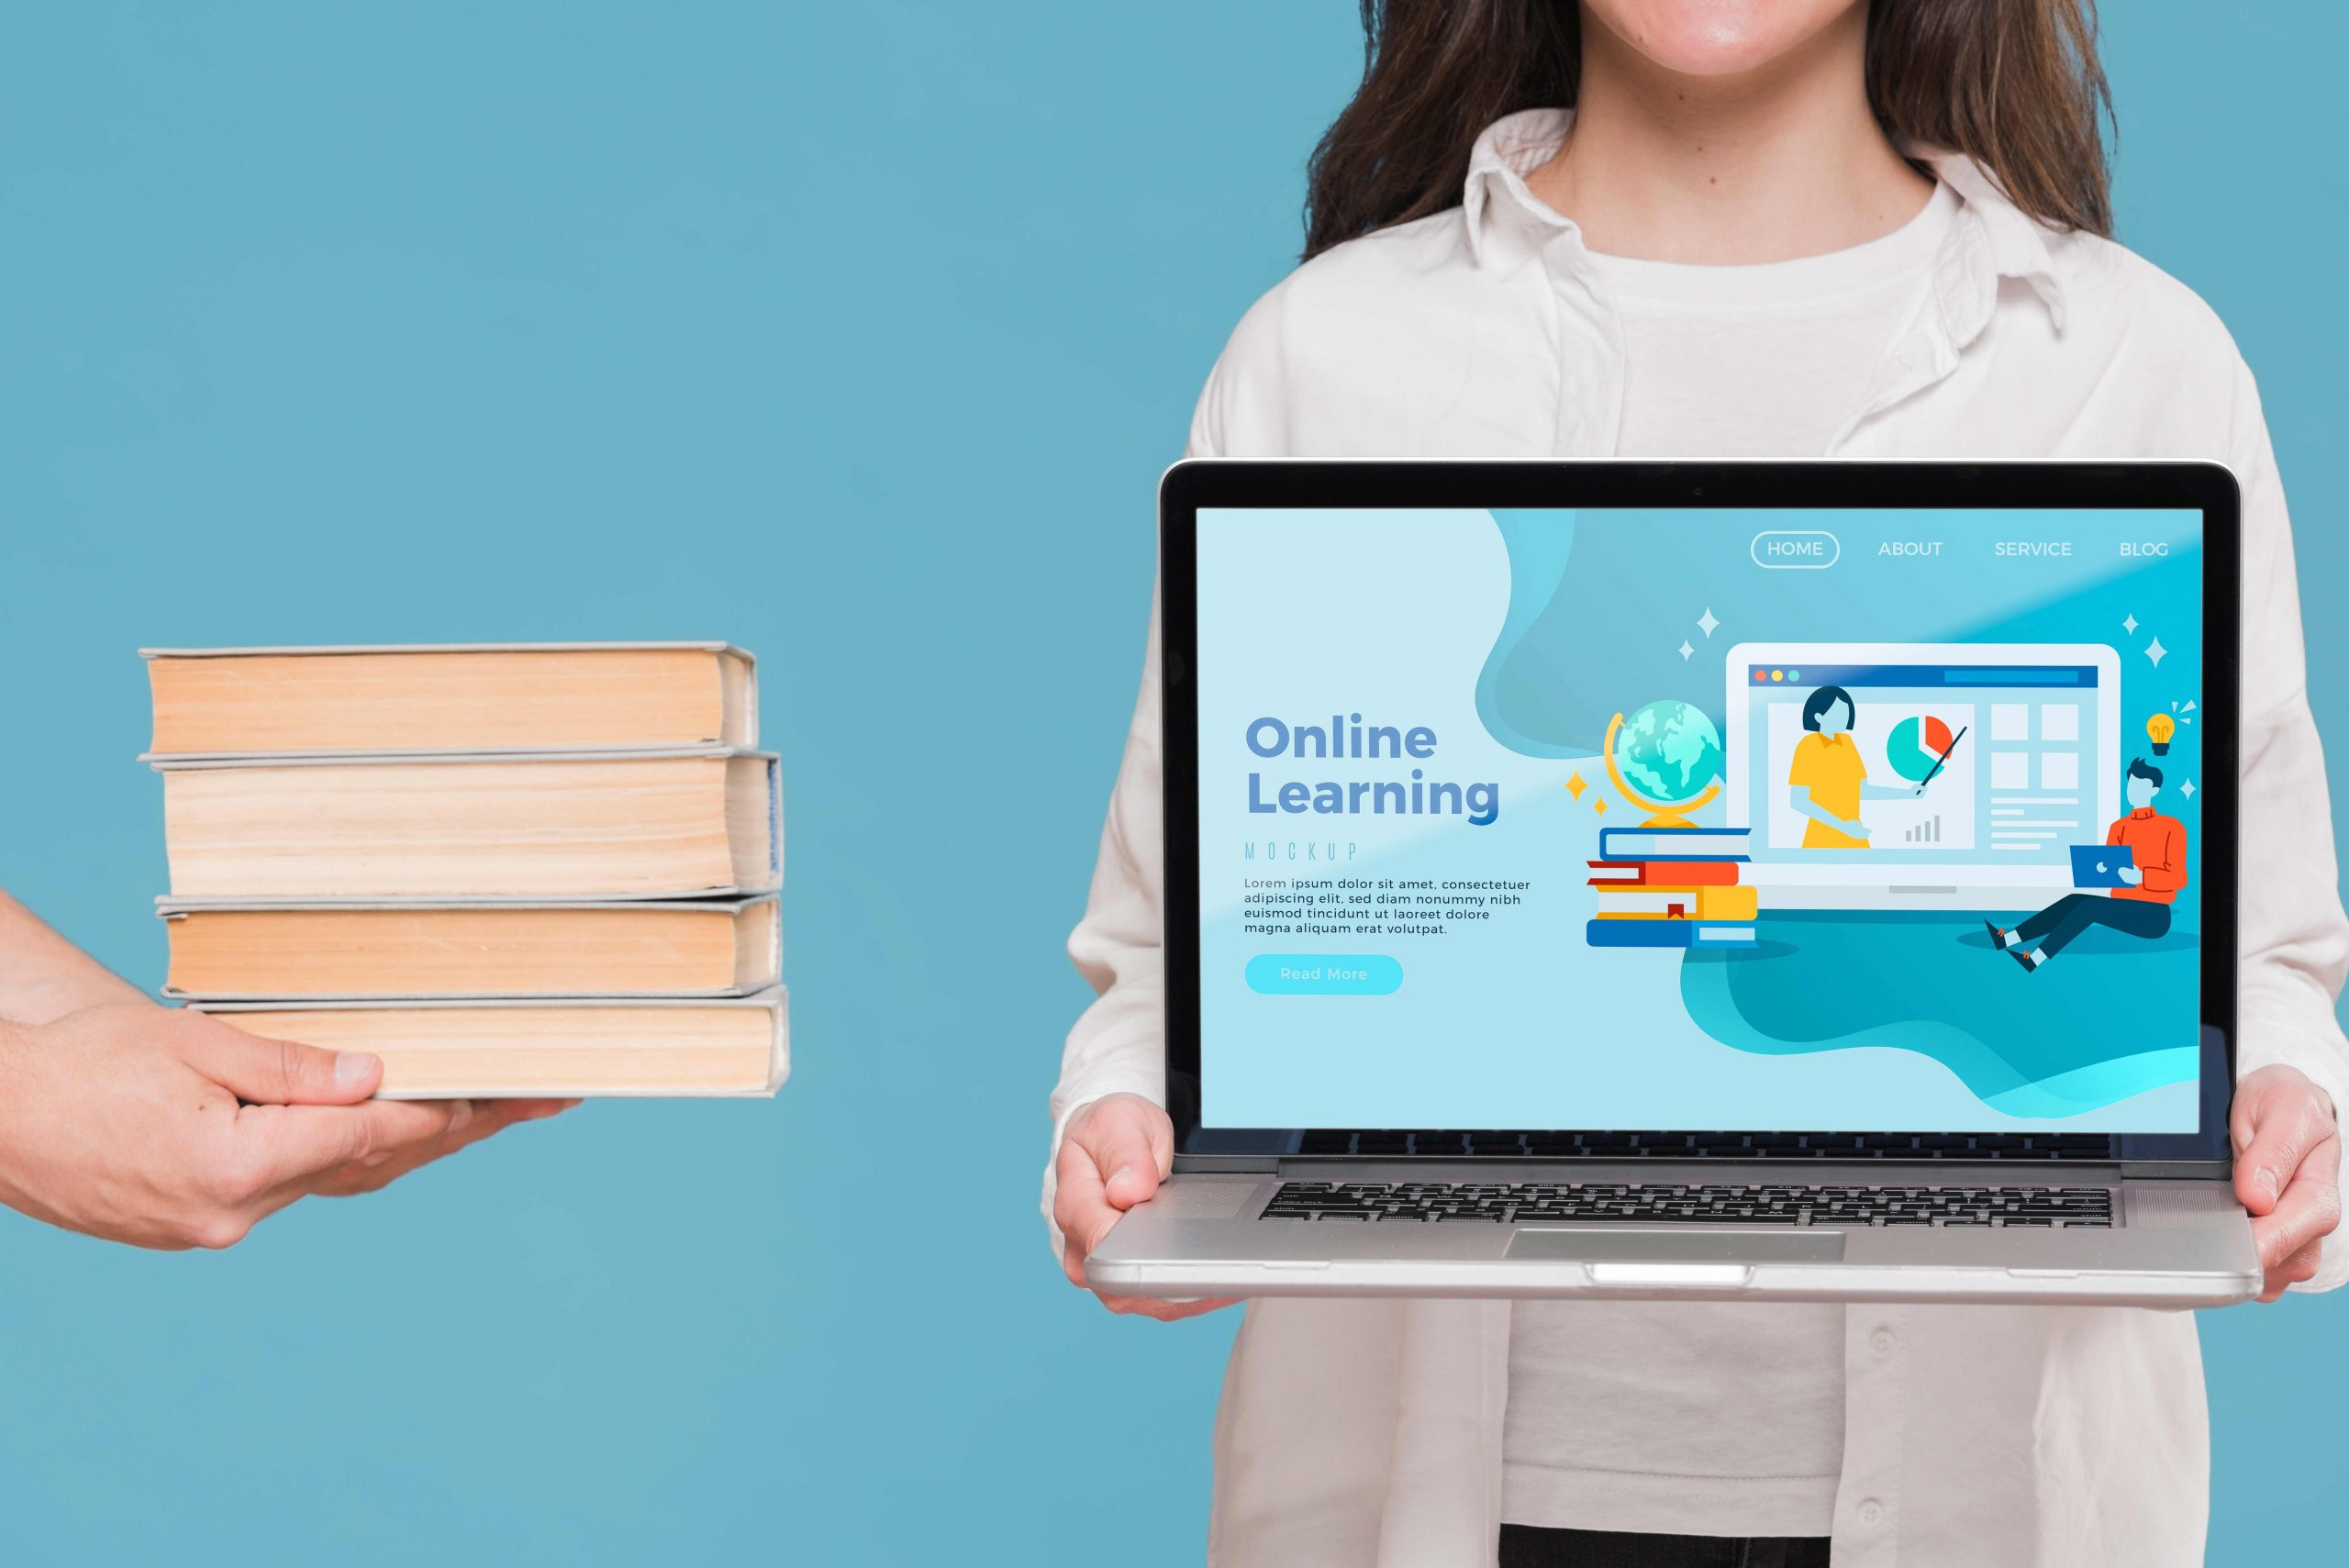 What are the difference between Online Learning (e-Learning) and Distance Learning Classes?